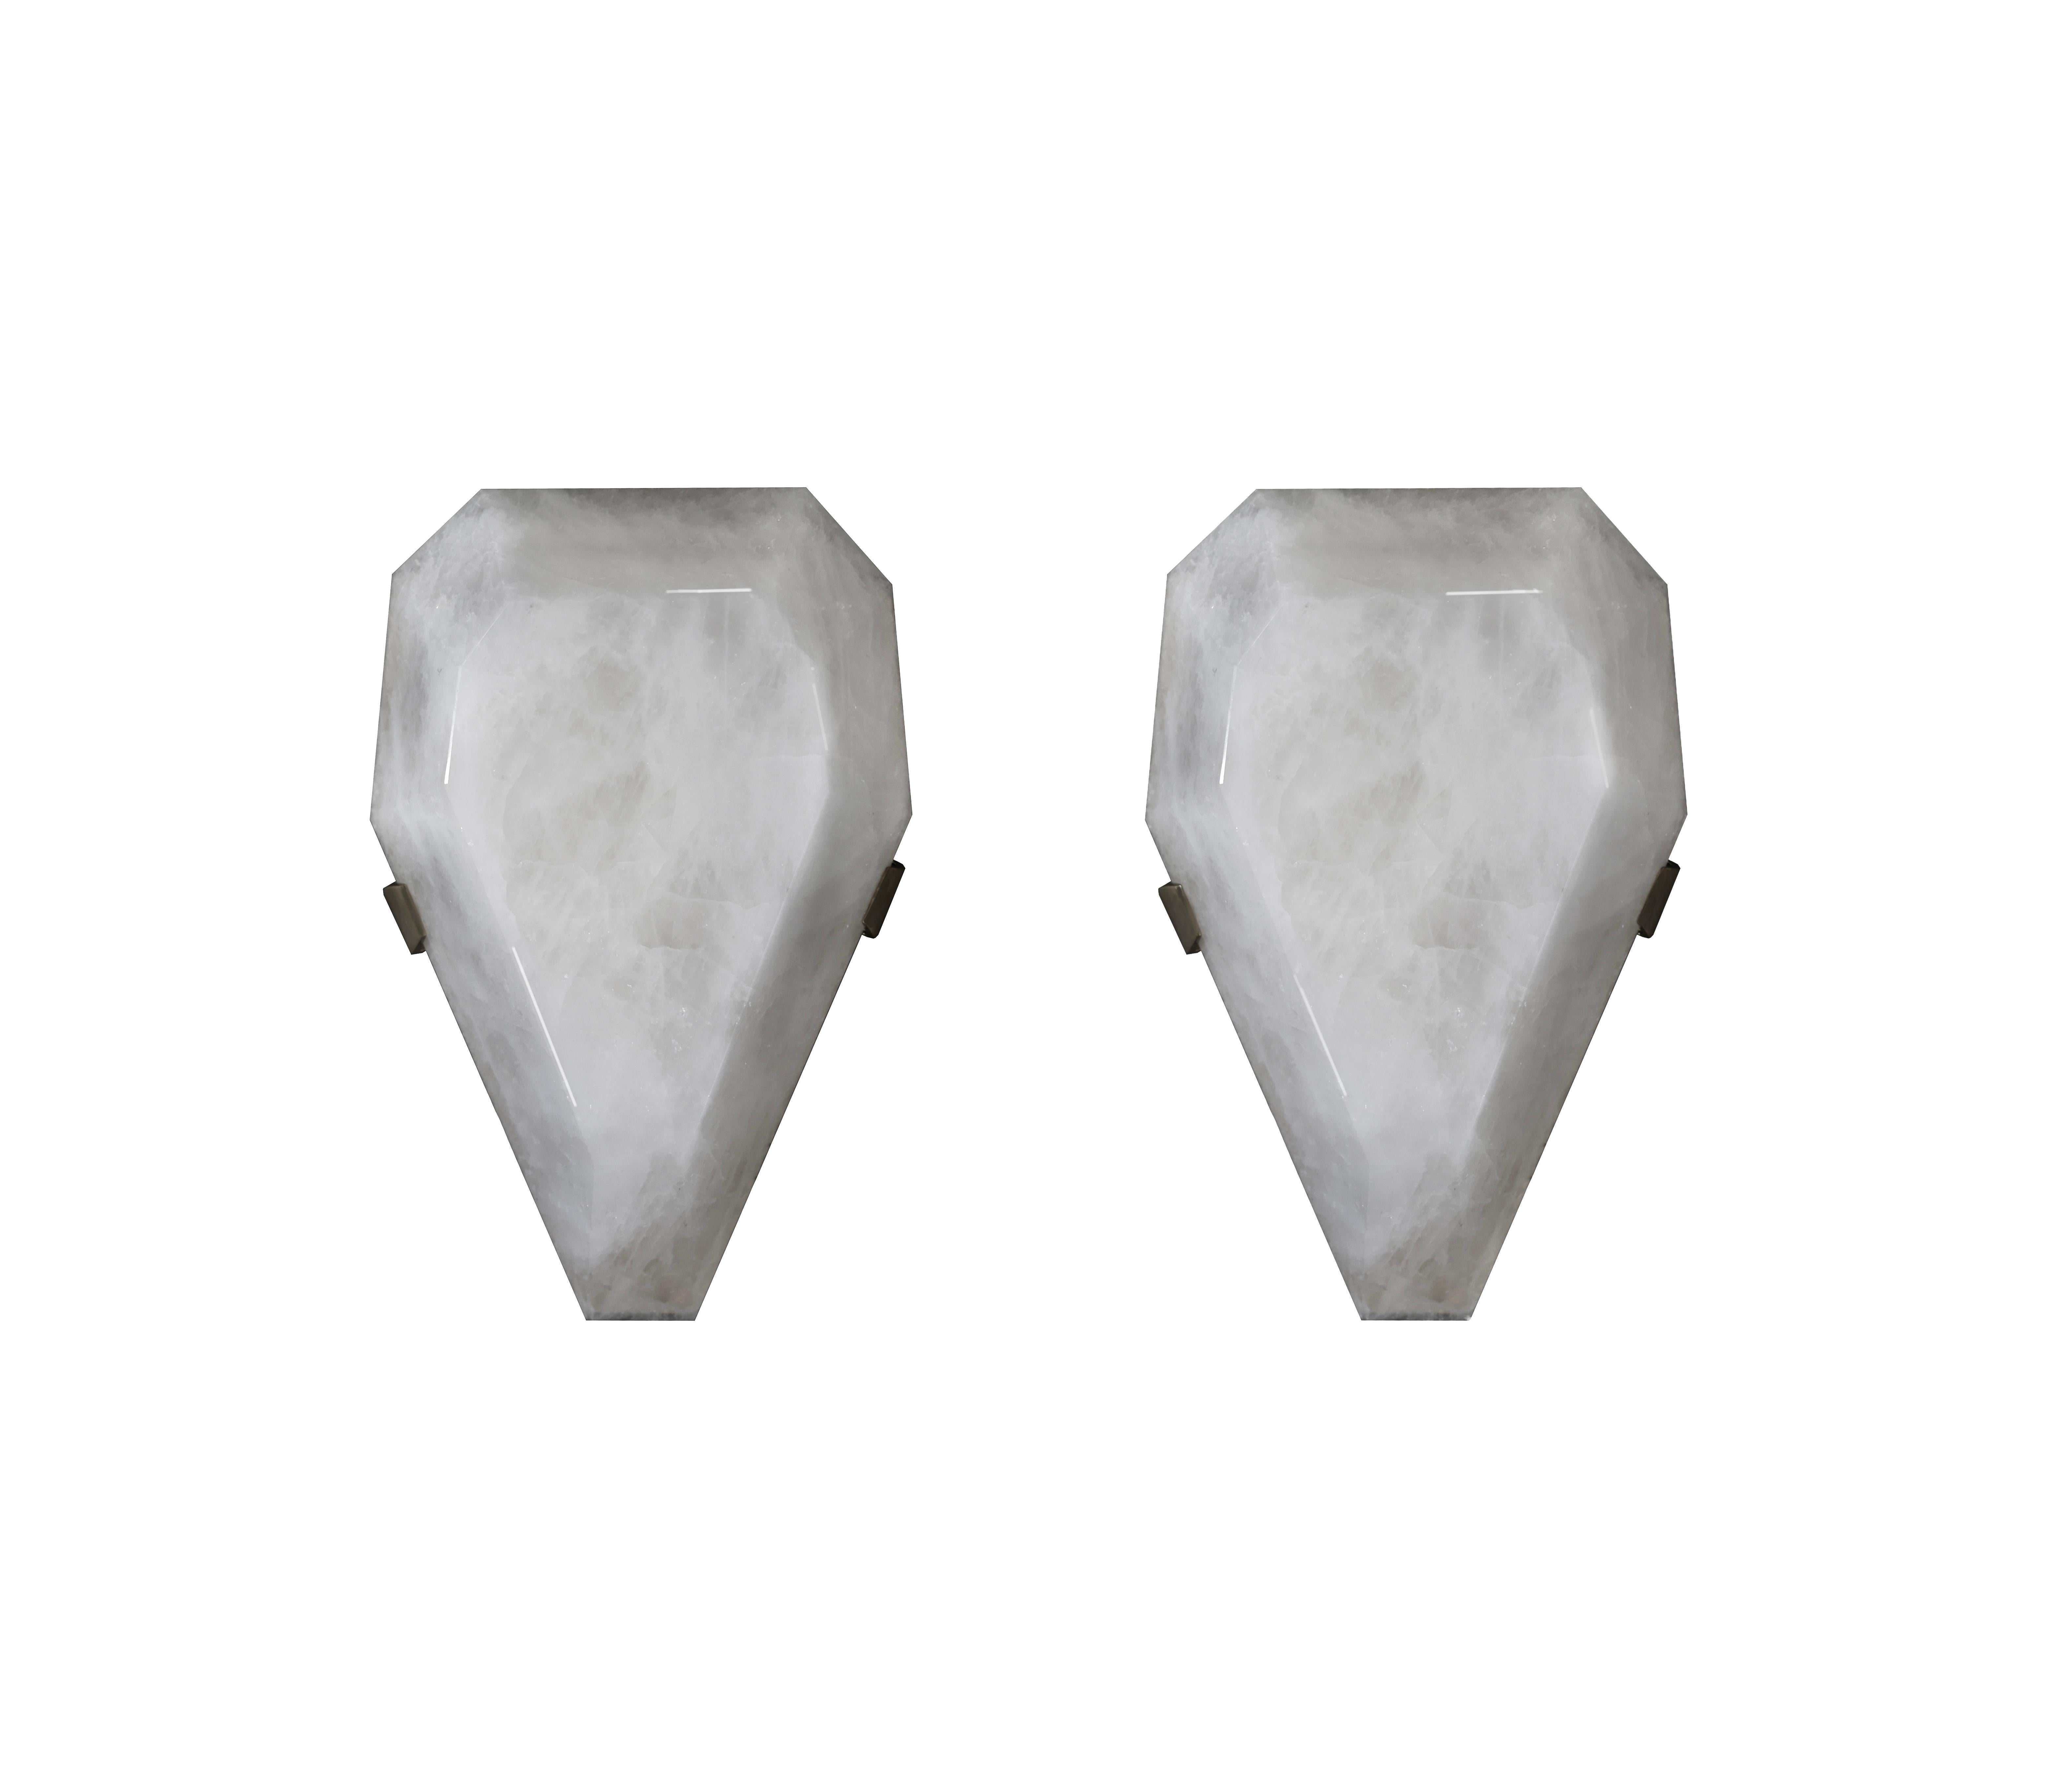 Pair of fine carved diamond form rock crystal sconces with antique brass mounts. Created by Phoenix Gallery, NYC.
Each sconce installed two sockets, use candelabra lightbulbs, 120W total
Custom size and metal finish upon request.